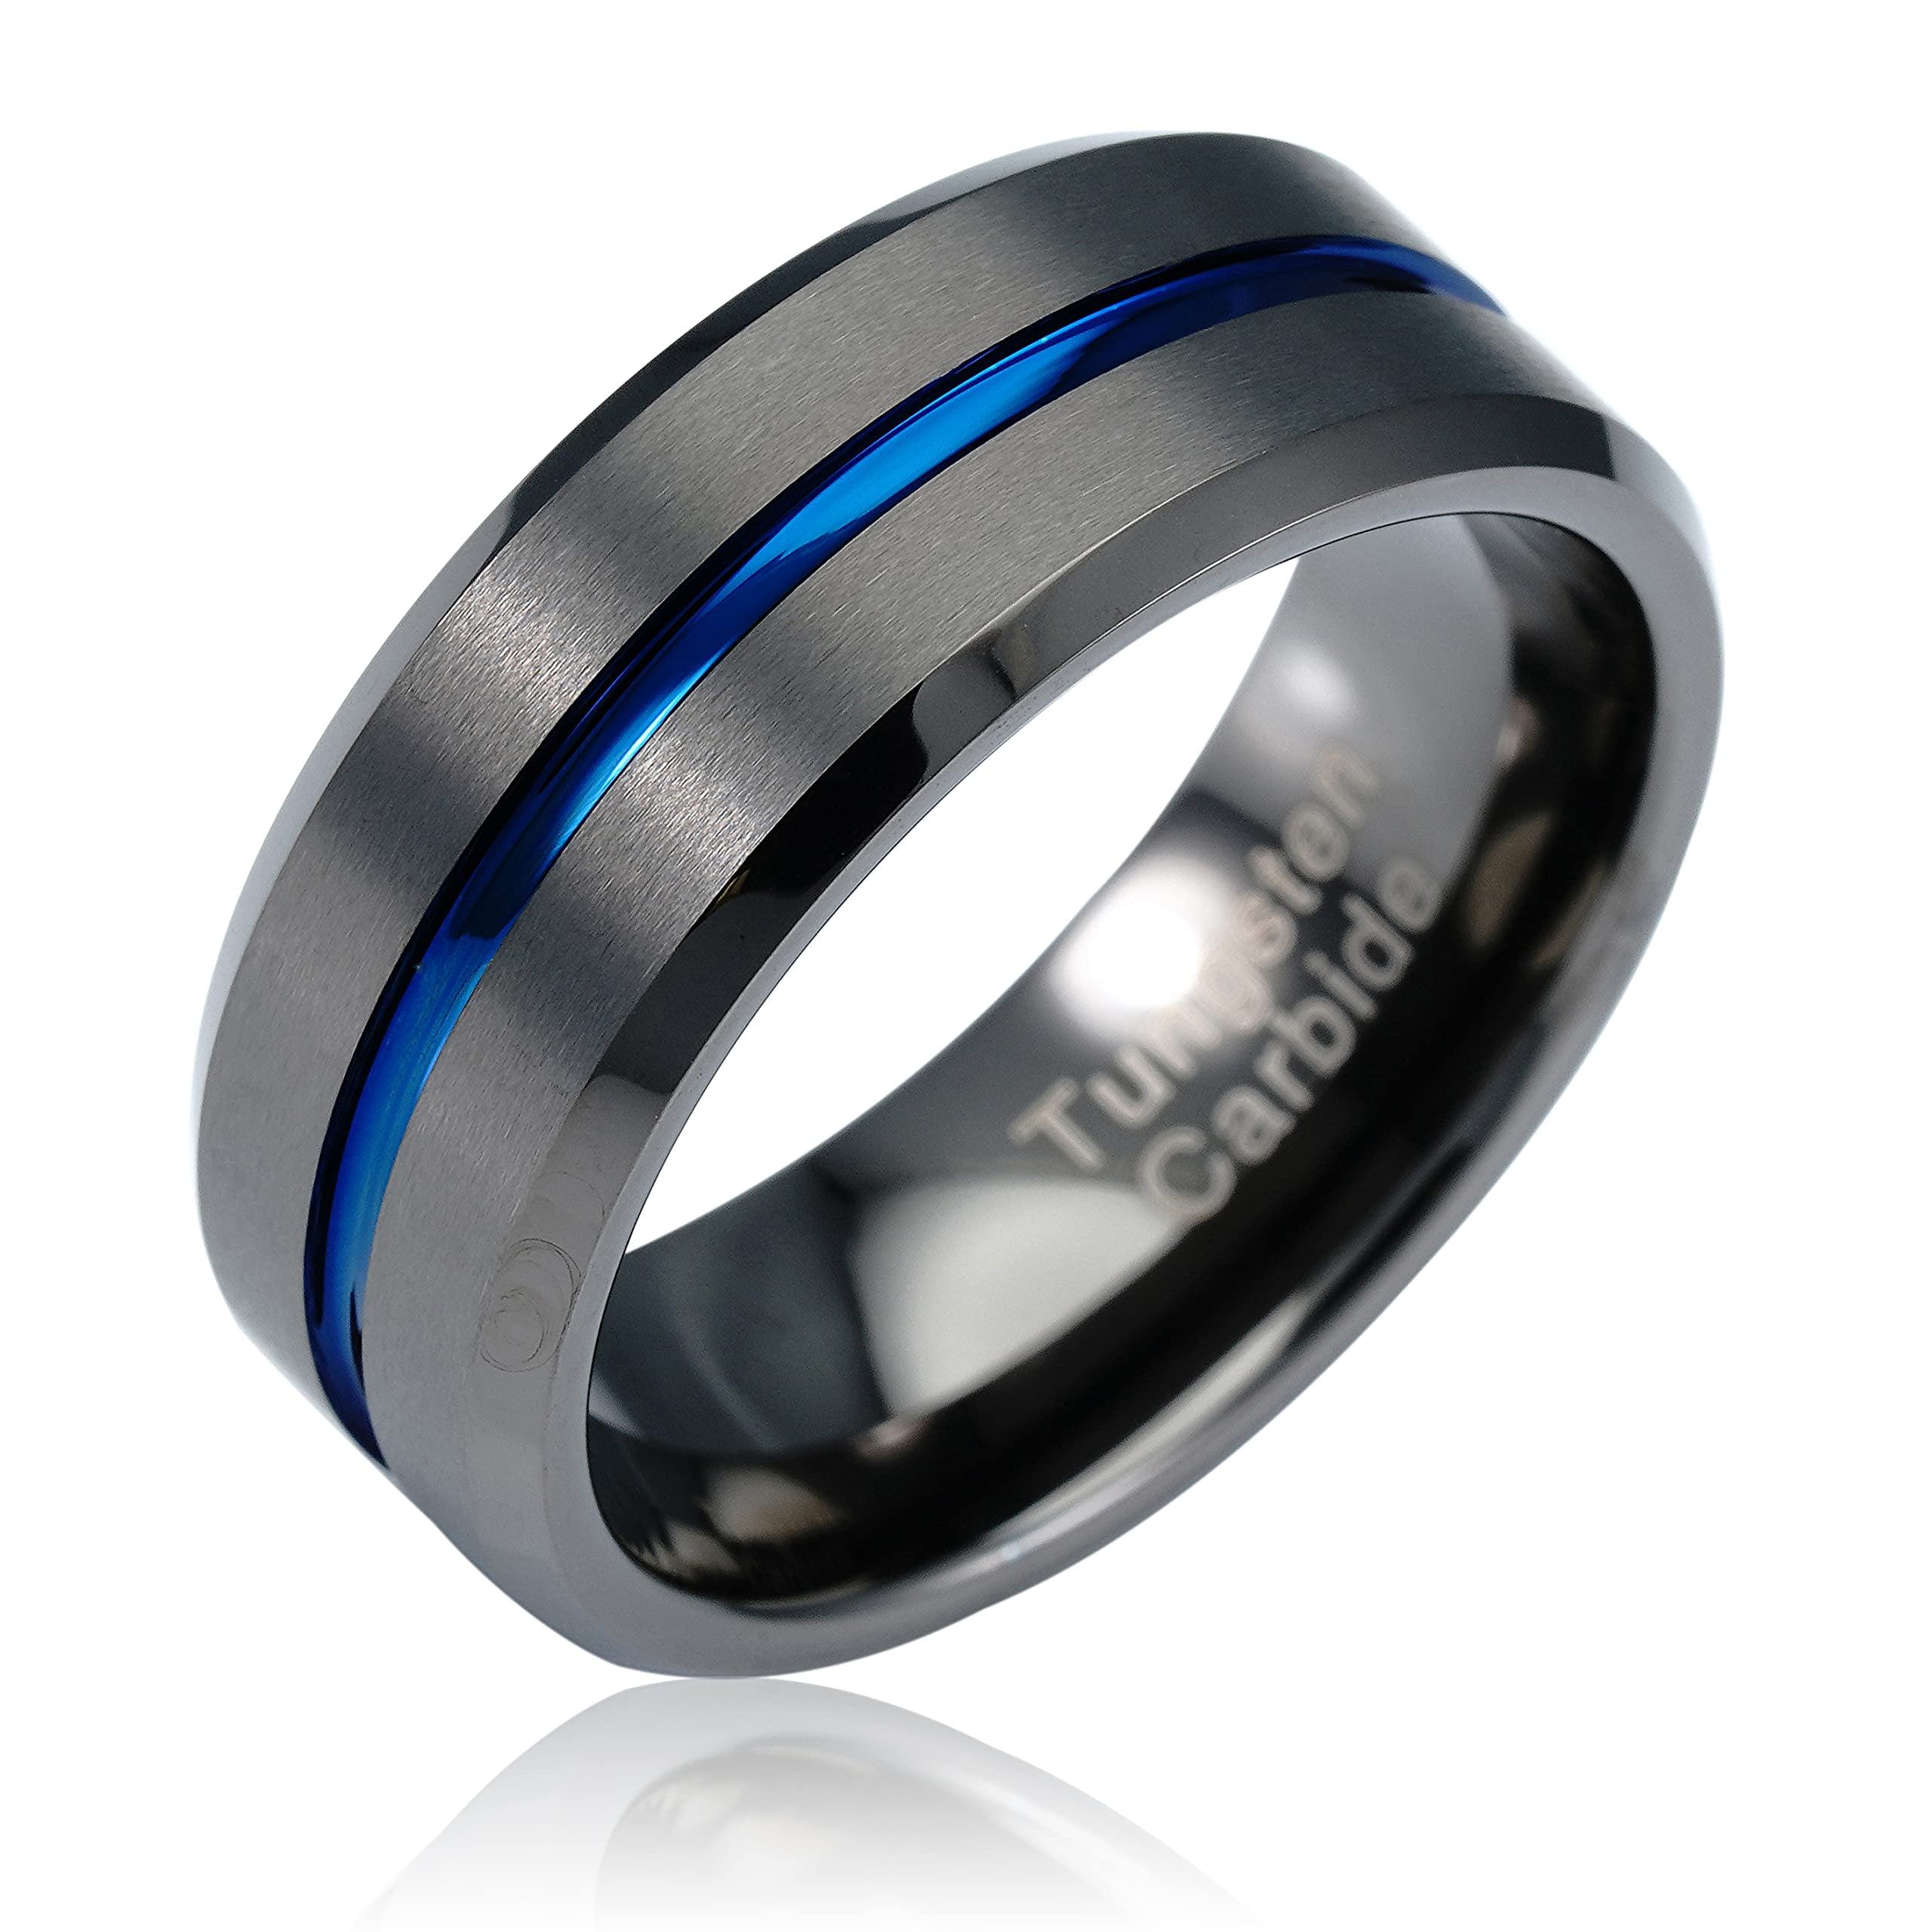 Gold Stainless Steel Ring for Men Women with Three Grooves for Wedding  Engagement High Polished Comfort Fit Size 7-12 